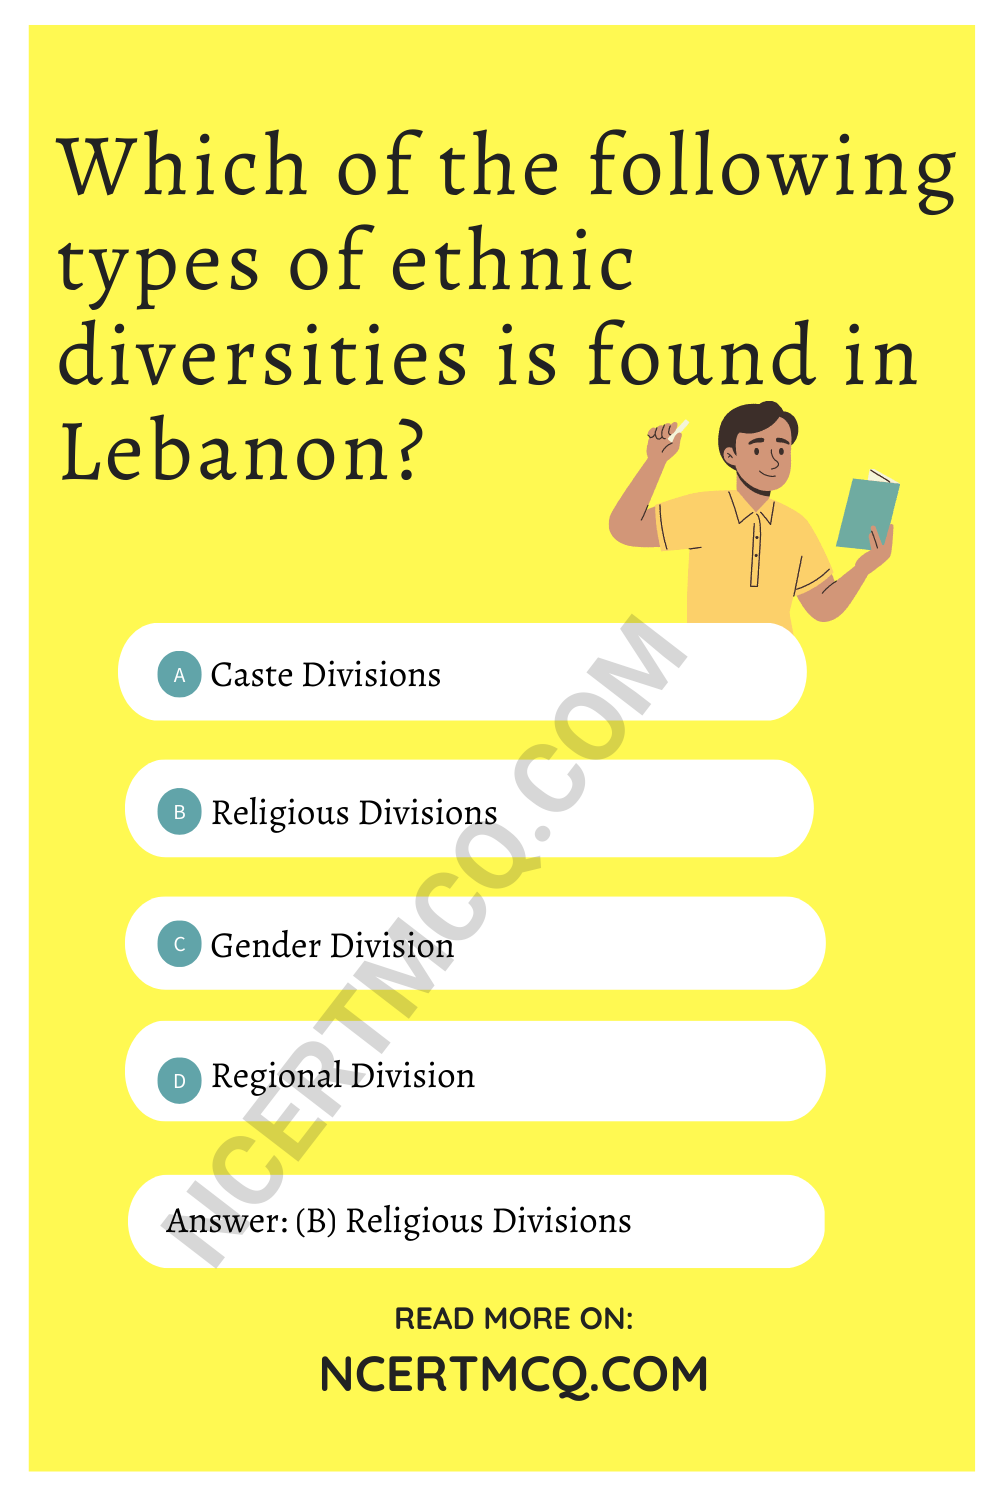 Which of the following types of ethnic diversities is found in Lebanon?